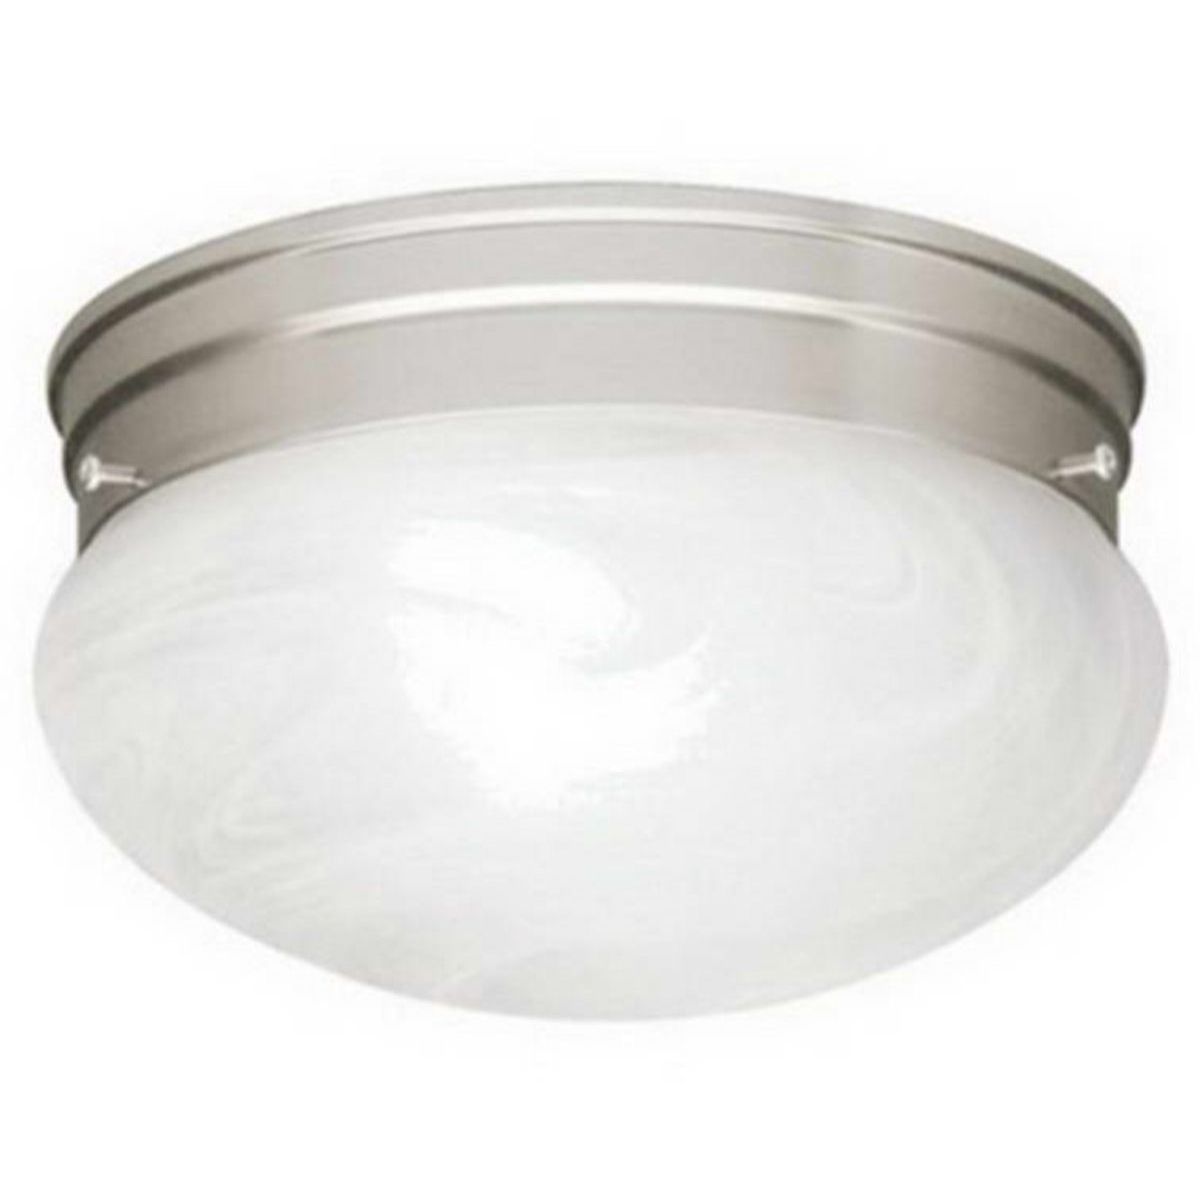 Ceiling Space 9 in. 2 Lights Puff Light Brushed Nickel finish